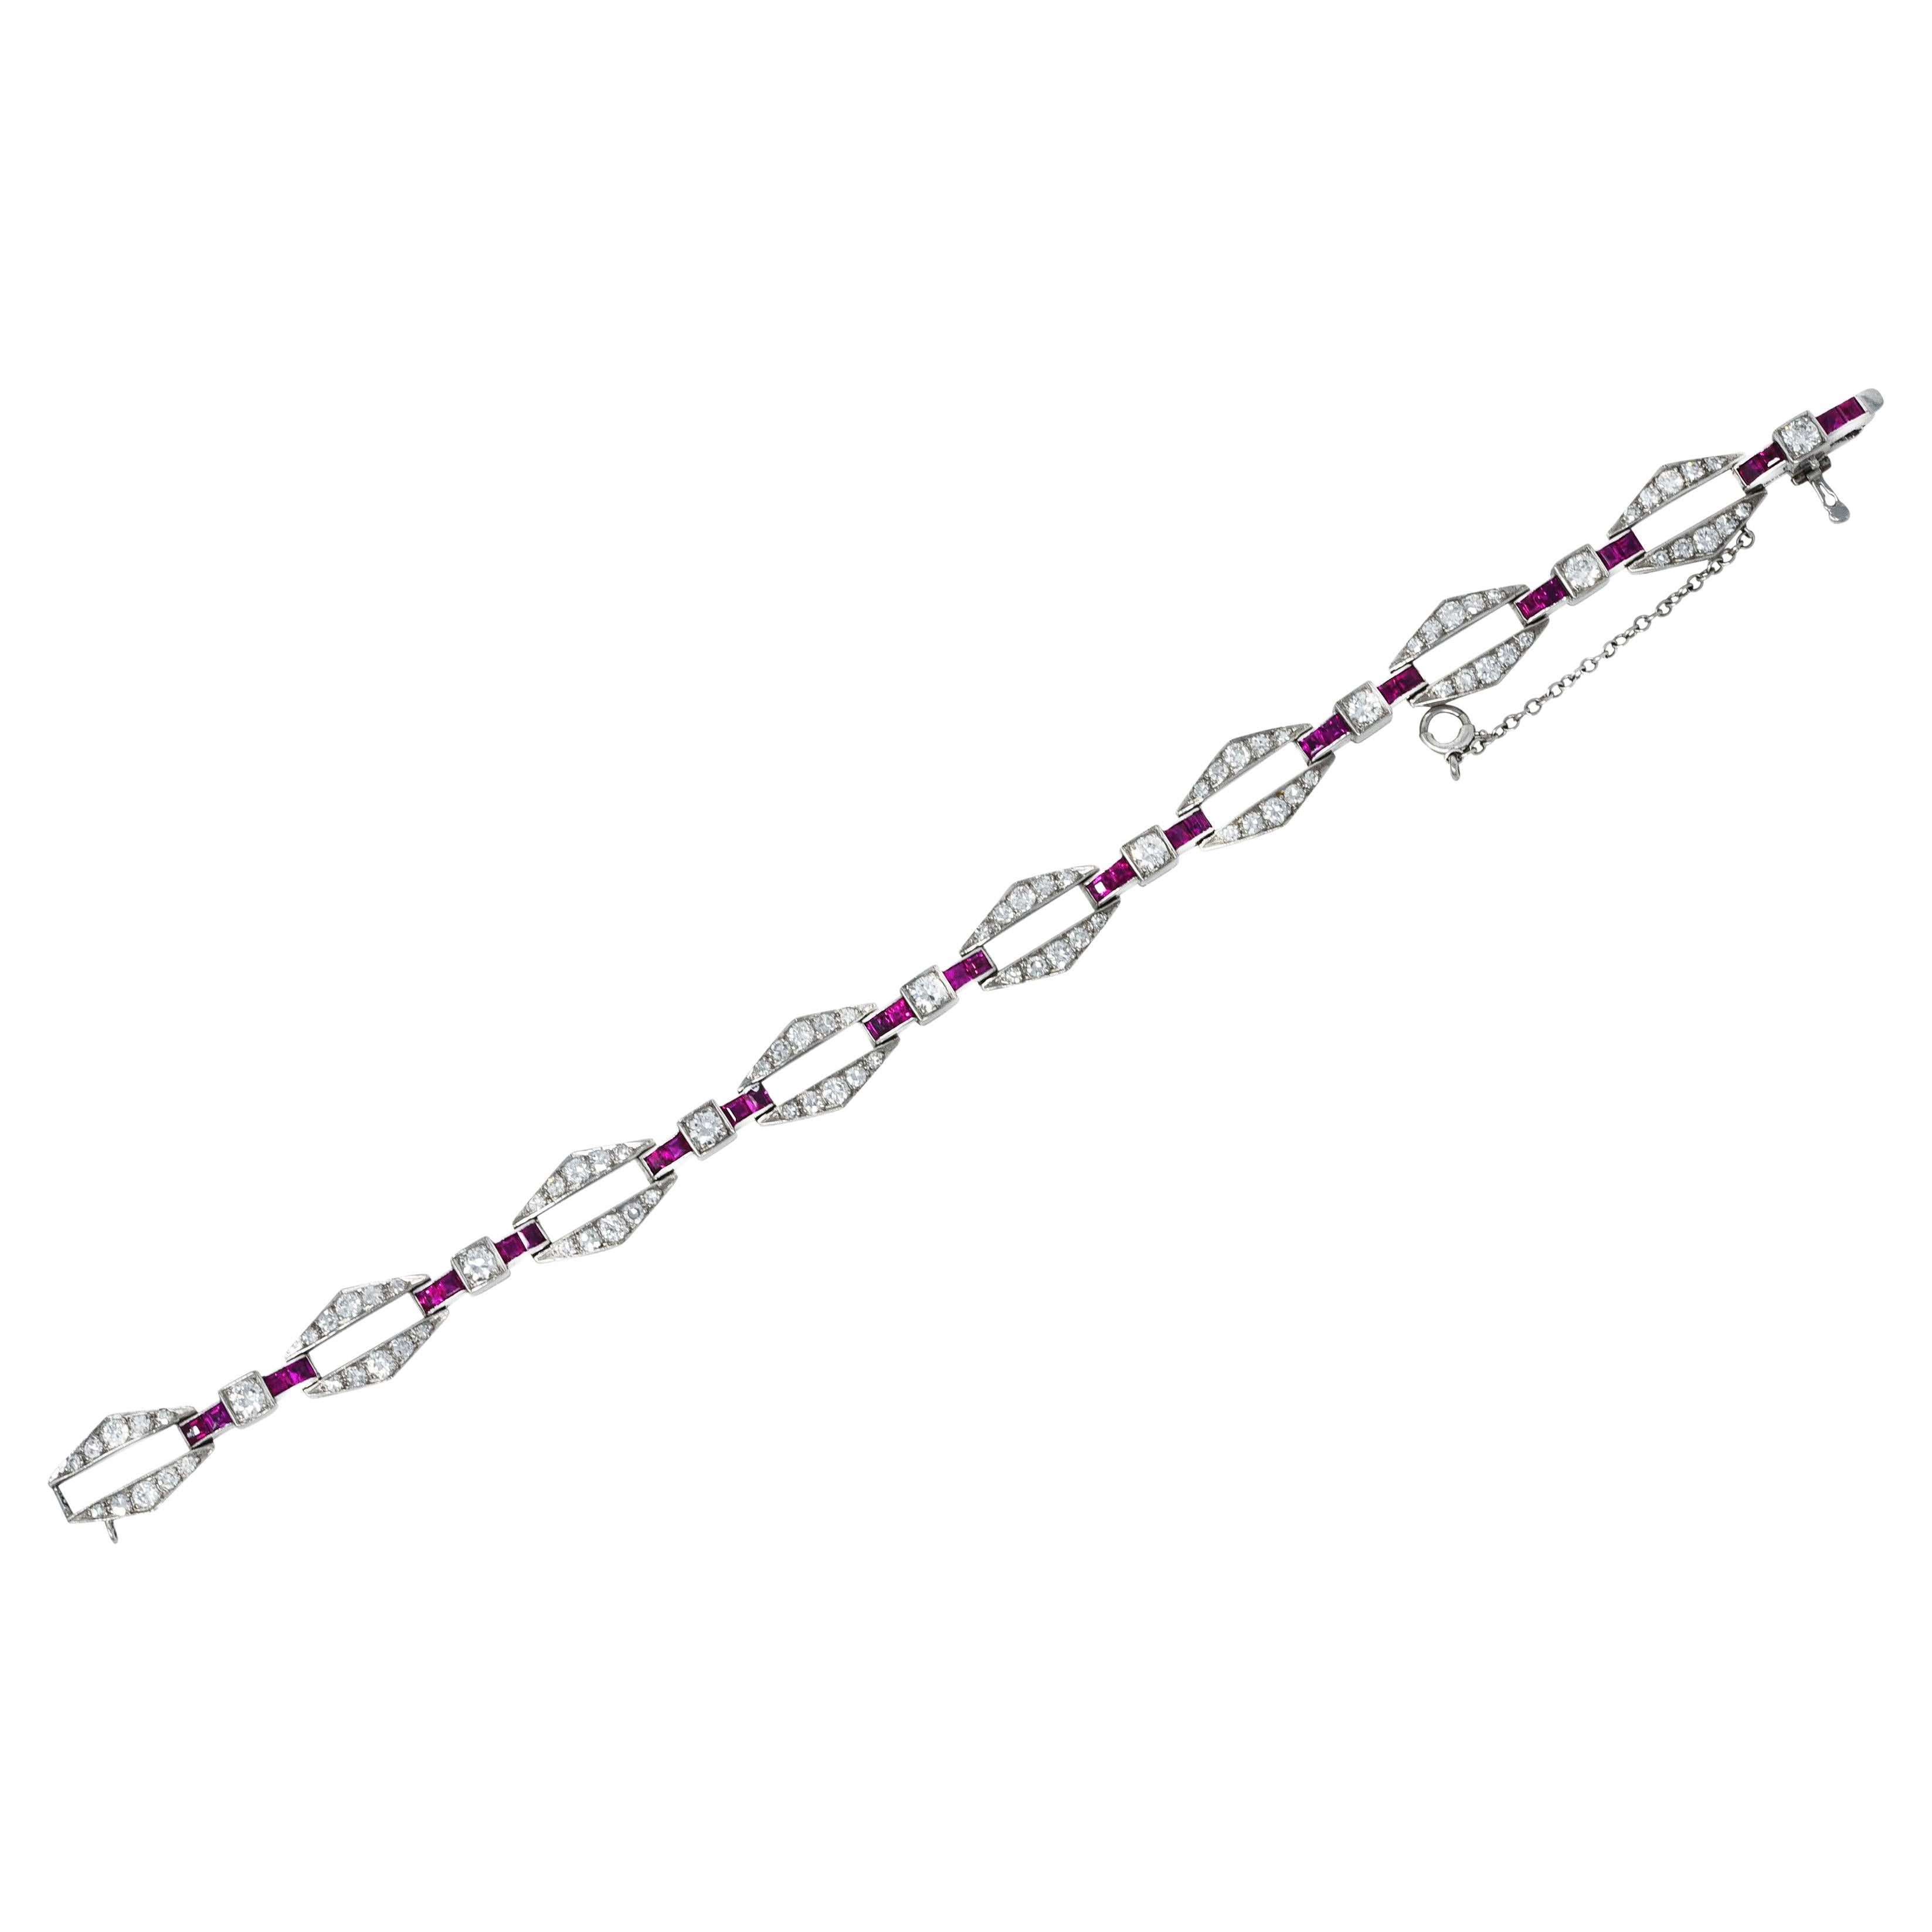 Bracelet is comprised of stylized hexagonal links alternating with square form links

Bead set throughout by transitional and single cut diamonds

Weighing in total approximately 2.50 carats with G to J color and VS to SI clarity

Square forms are